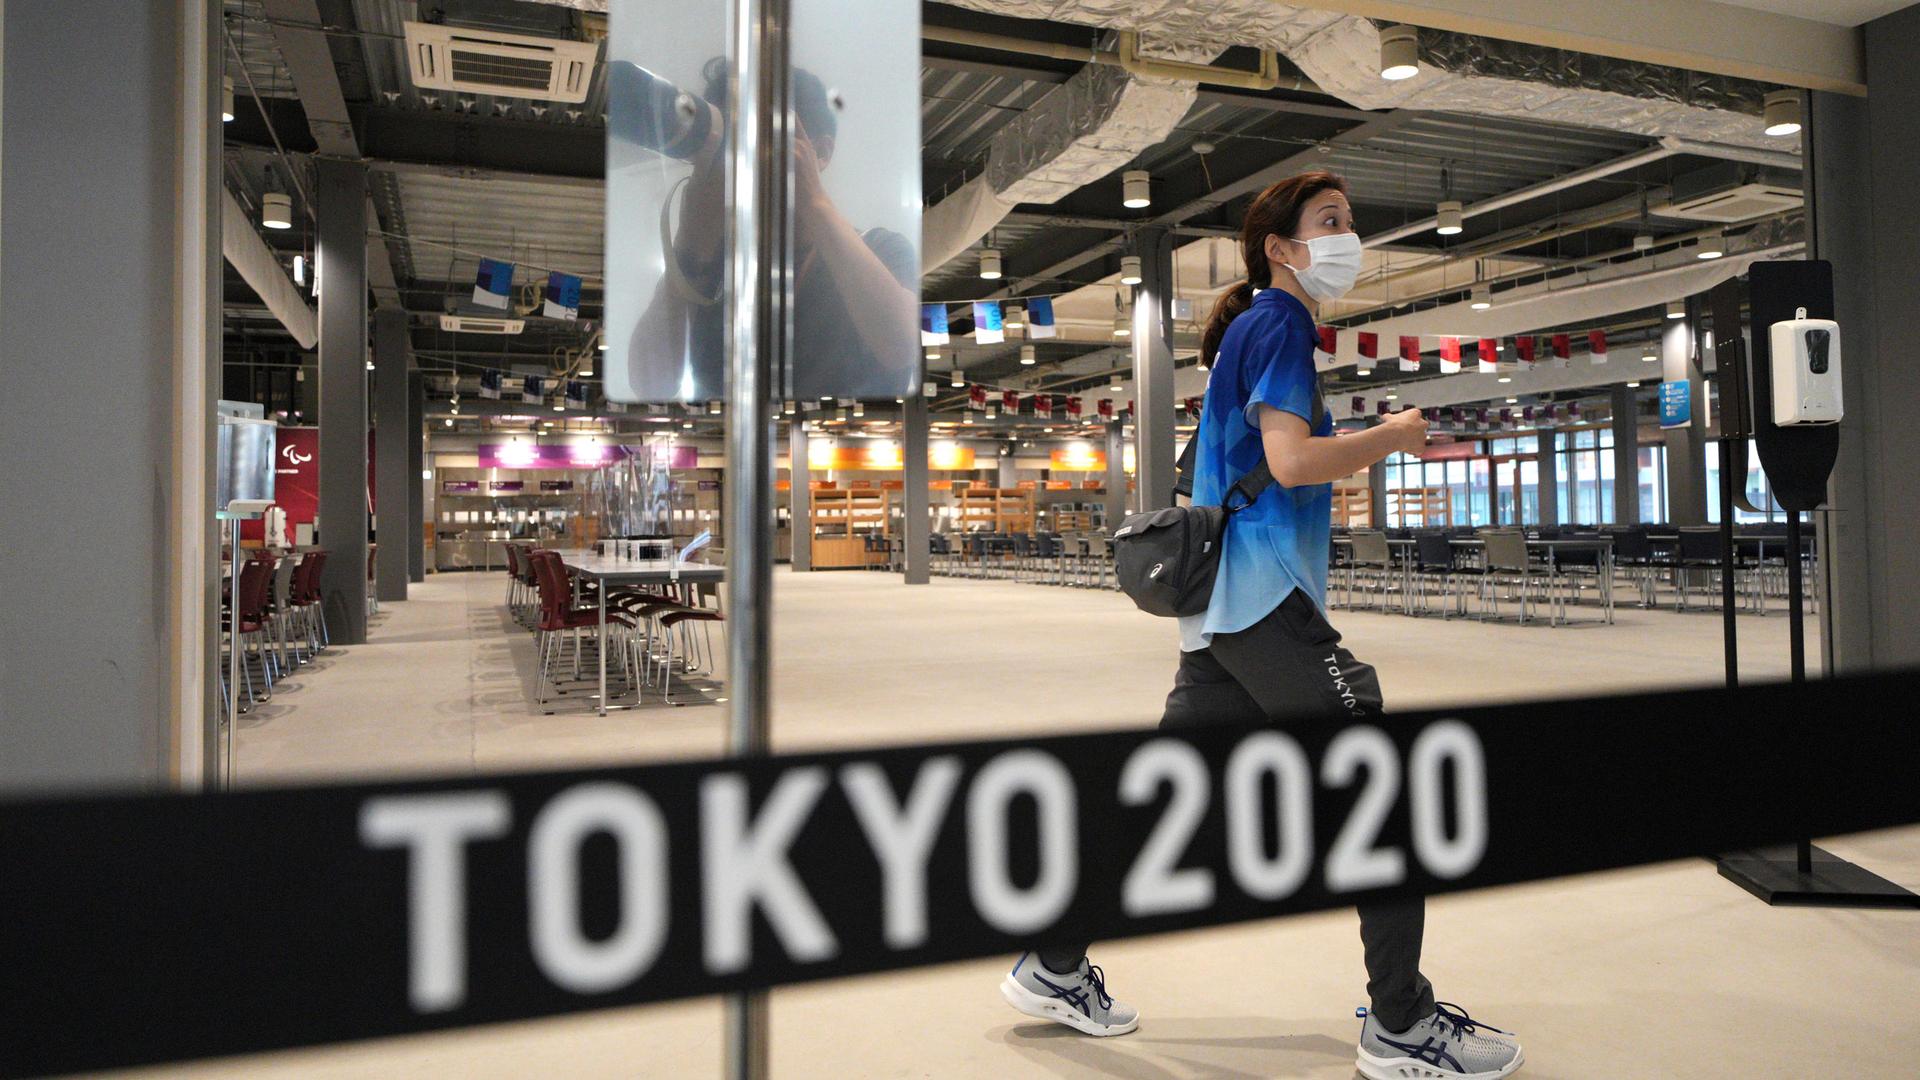 A woman is shown walking and wearing a face mask and blue t-shirt in a nearly empty dining hall with a sign in the nearground that says "Tokyo 2020."